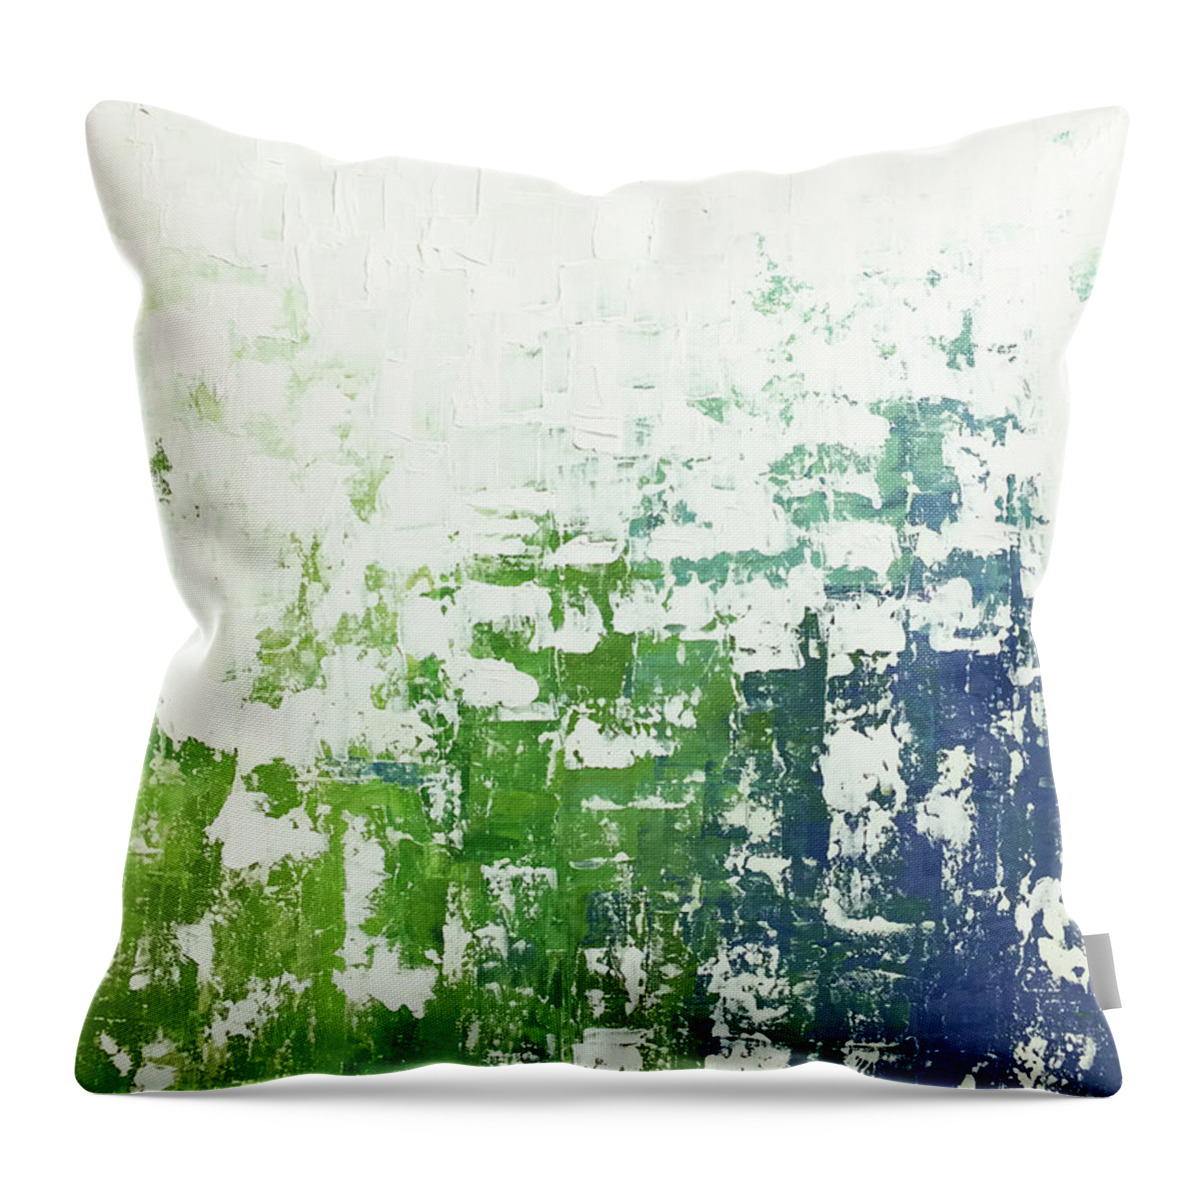 Contemporary Throw Pillow featuring the painting Chill by Linda Bailey